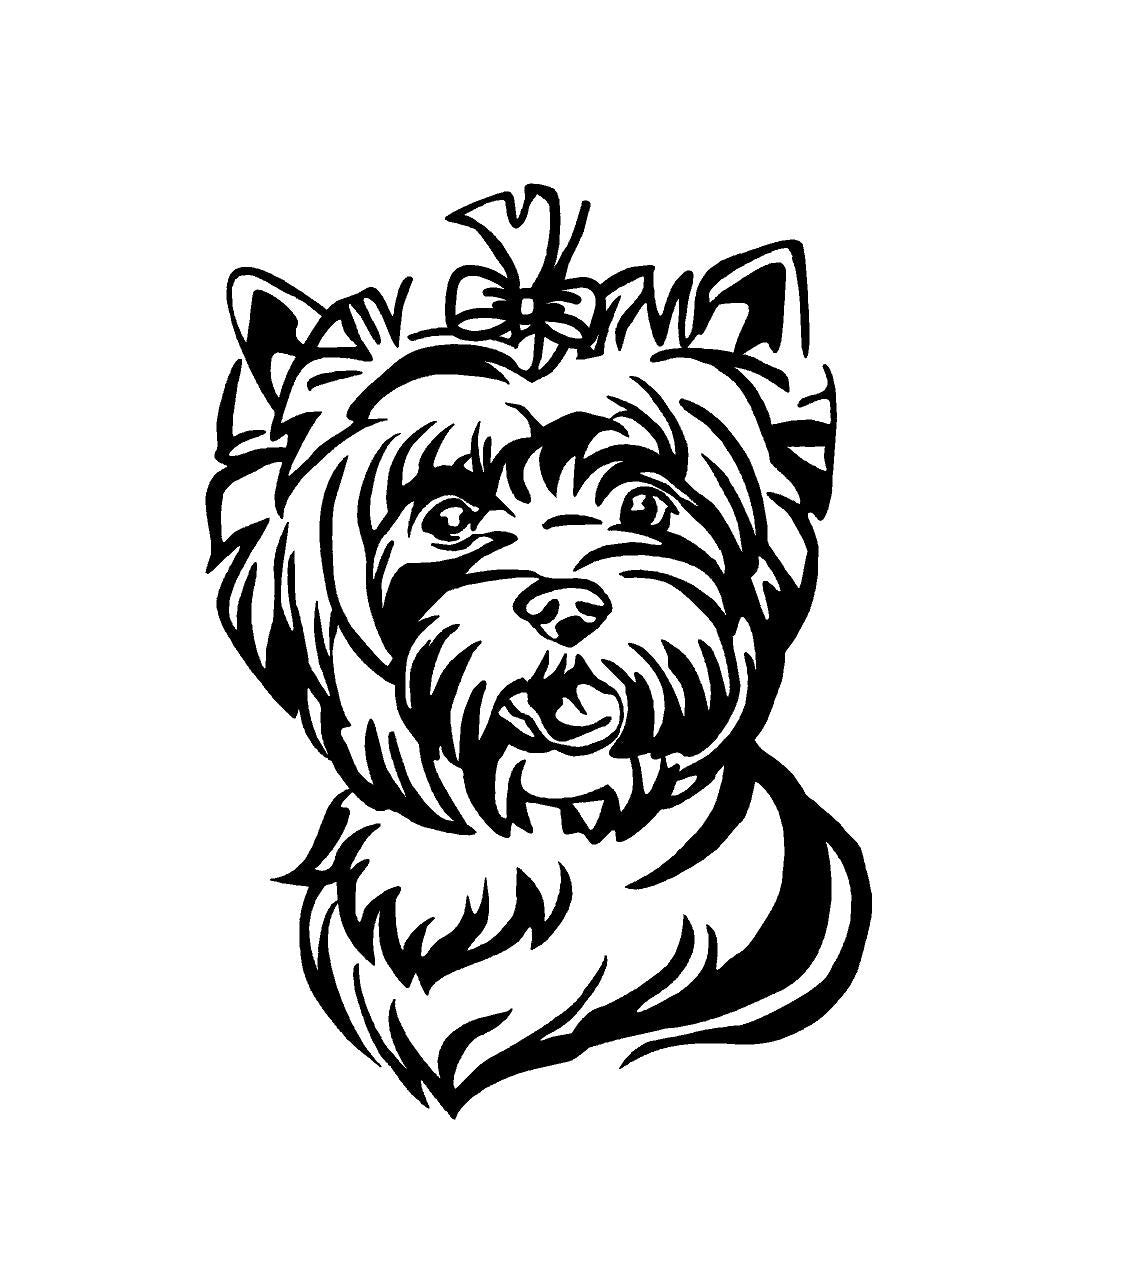 Yorkie Dog Decal Yorkie Dog Breed Decal Yorkie Vinyl Decal Custom Car Vehicle Decal Dog lovers Yorkie decal Yorkshire Terrier decal